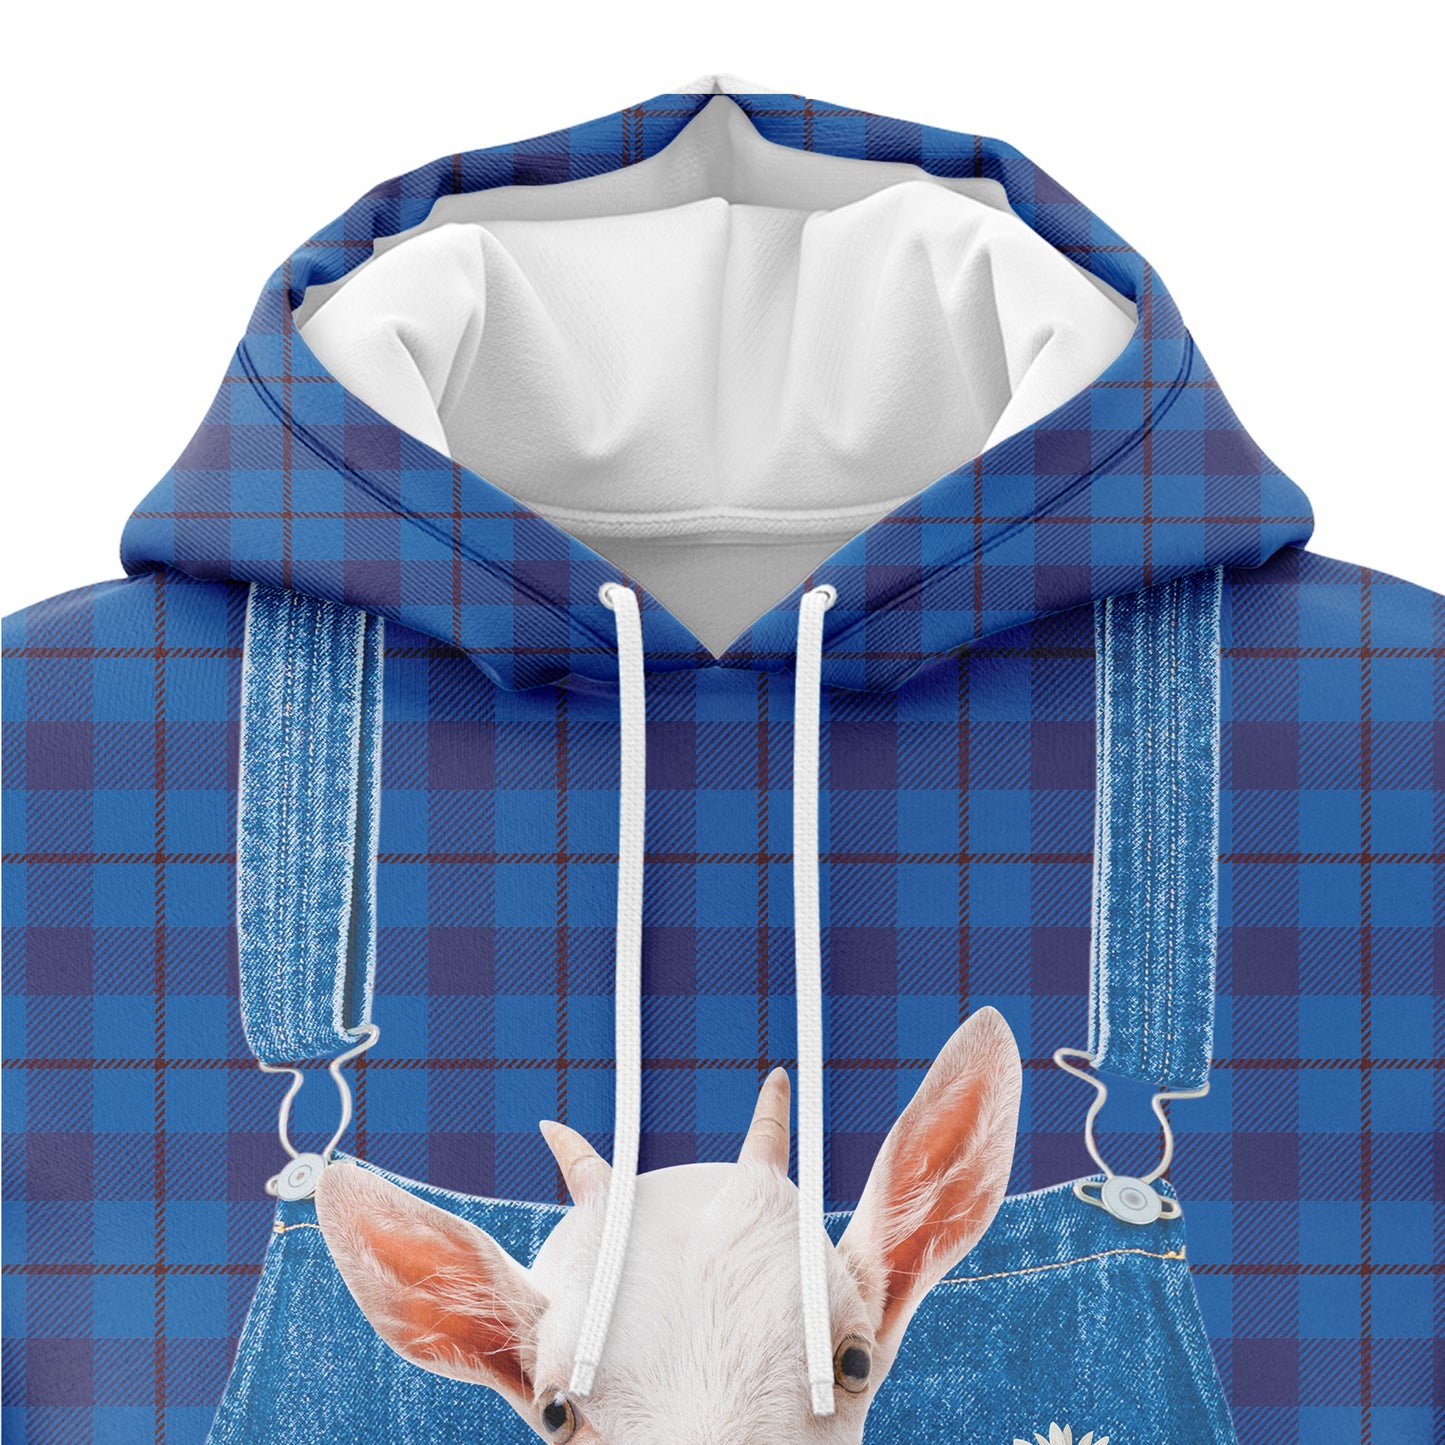 Custom Just A Girl Who Loves Goats TG51111 All Over Print Unisex Hoodie